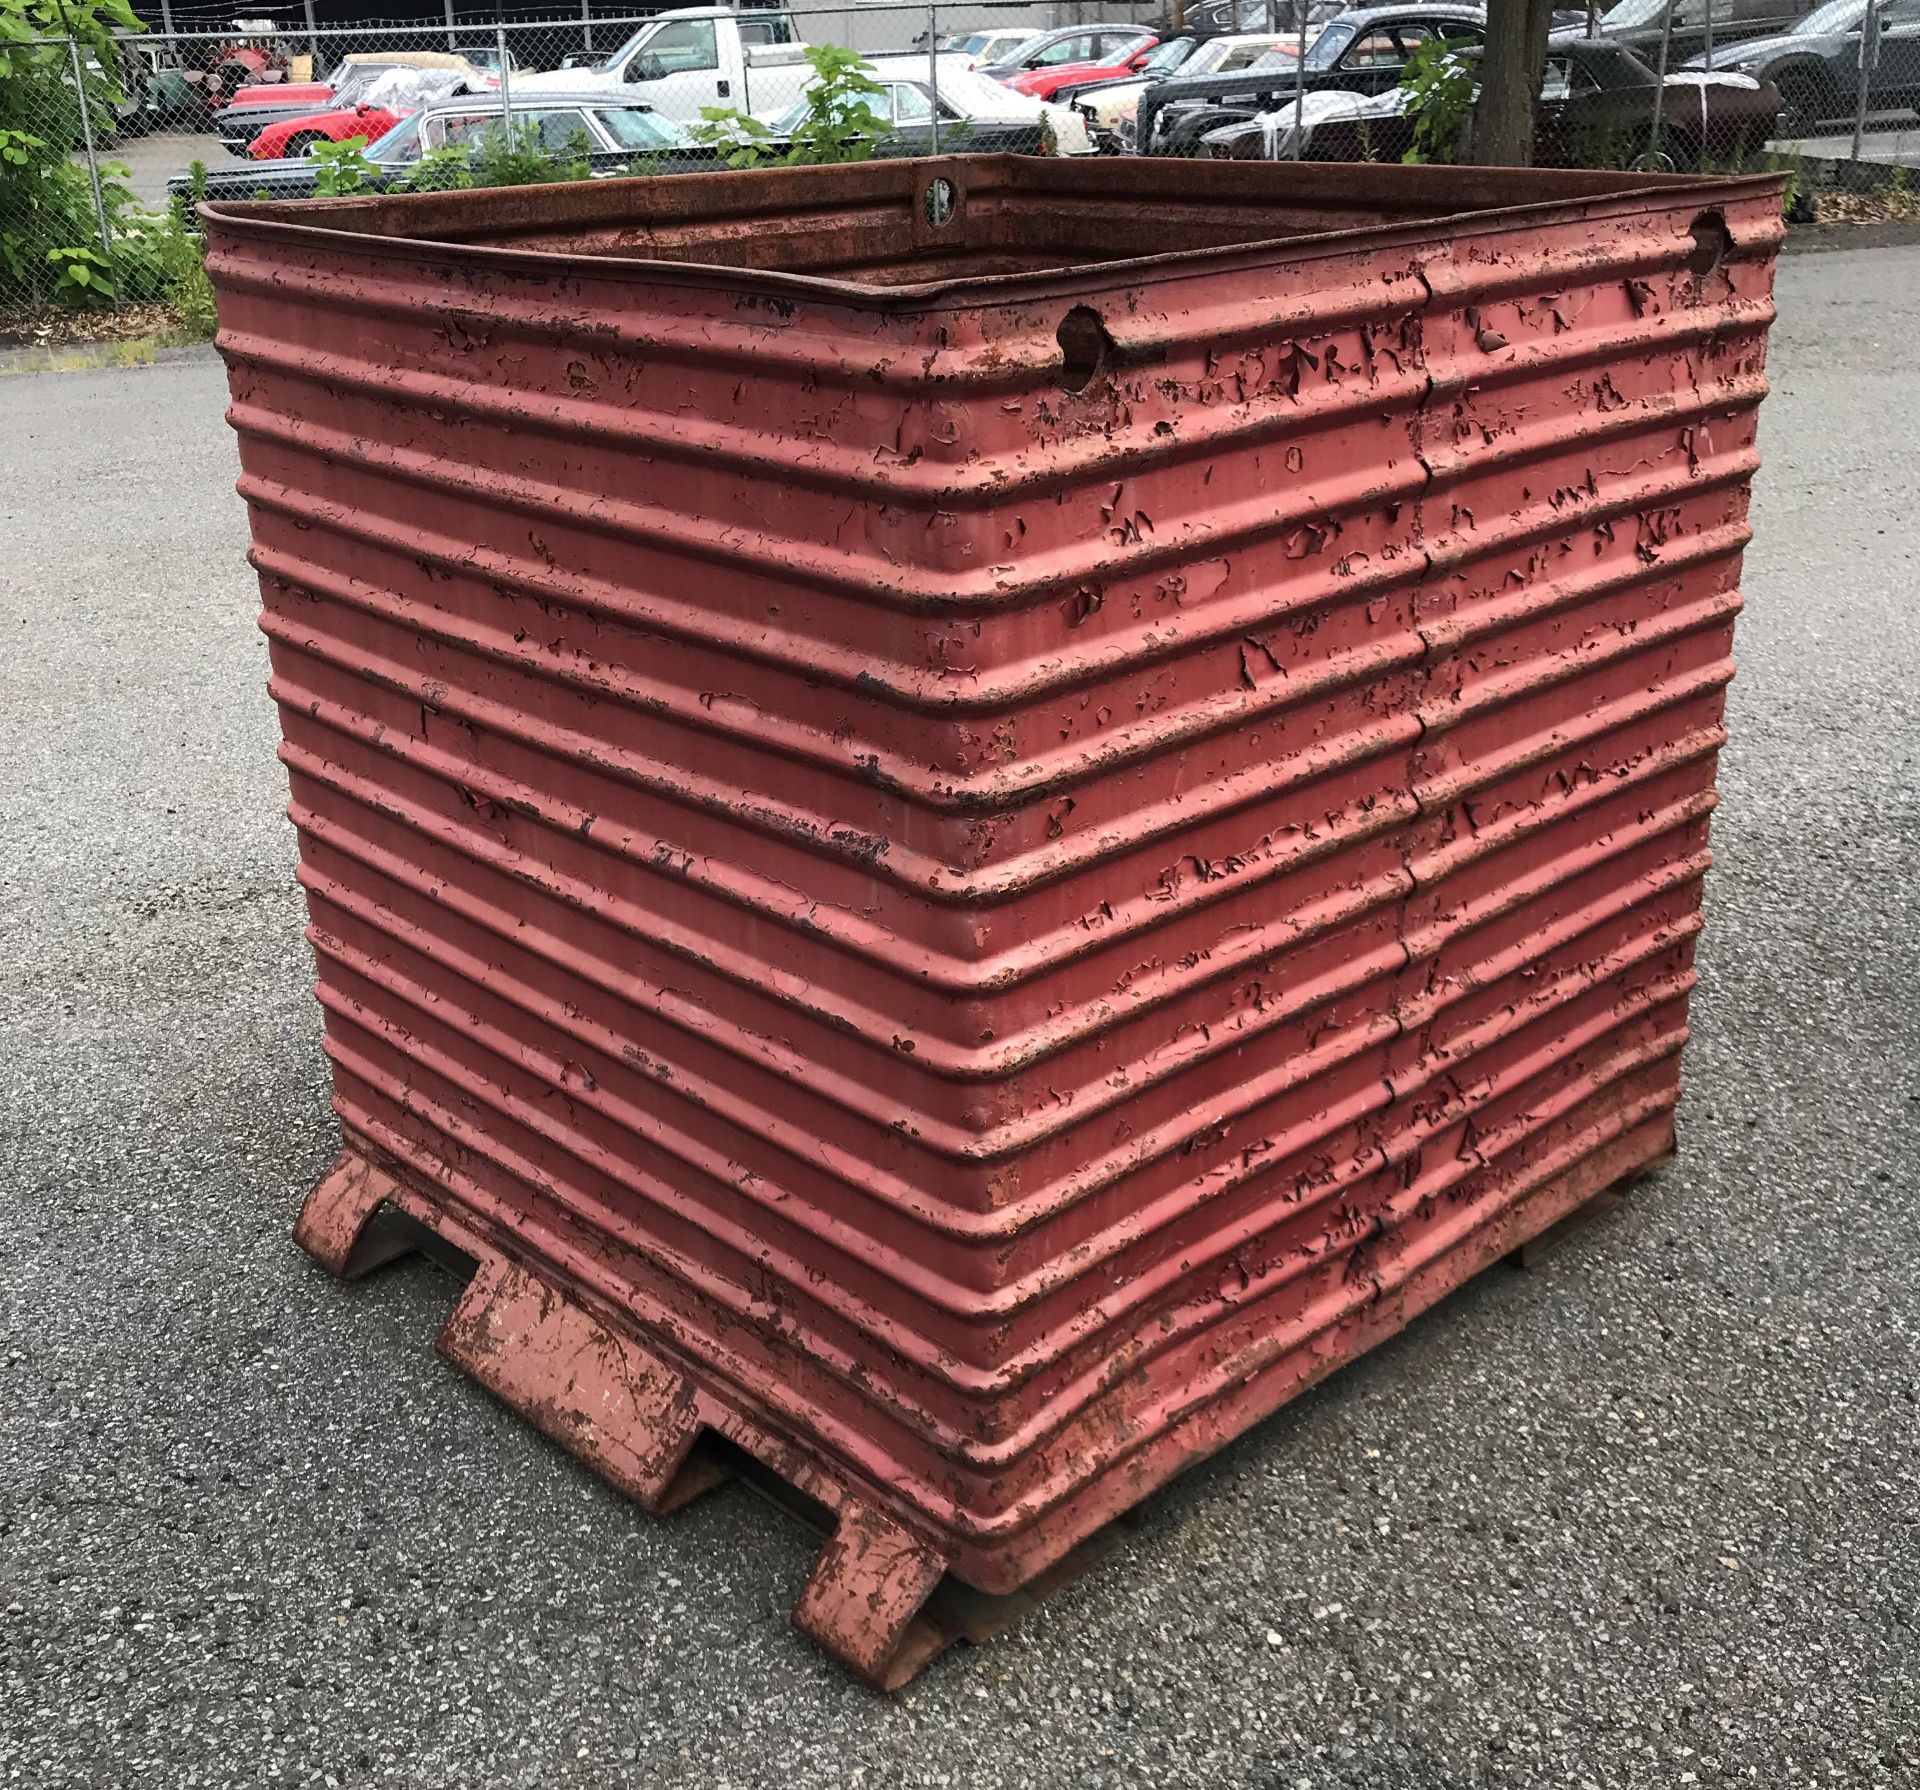 48"W x 48"L x 48"H Corrugated Steel Container